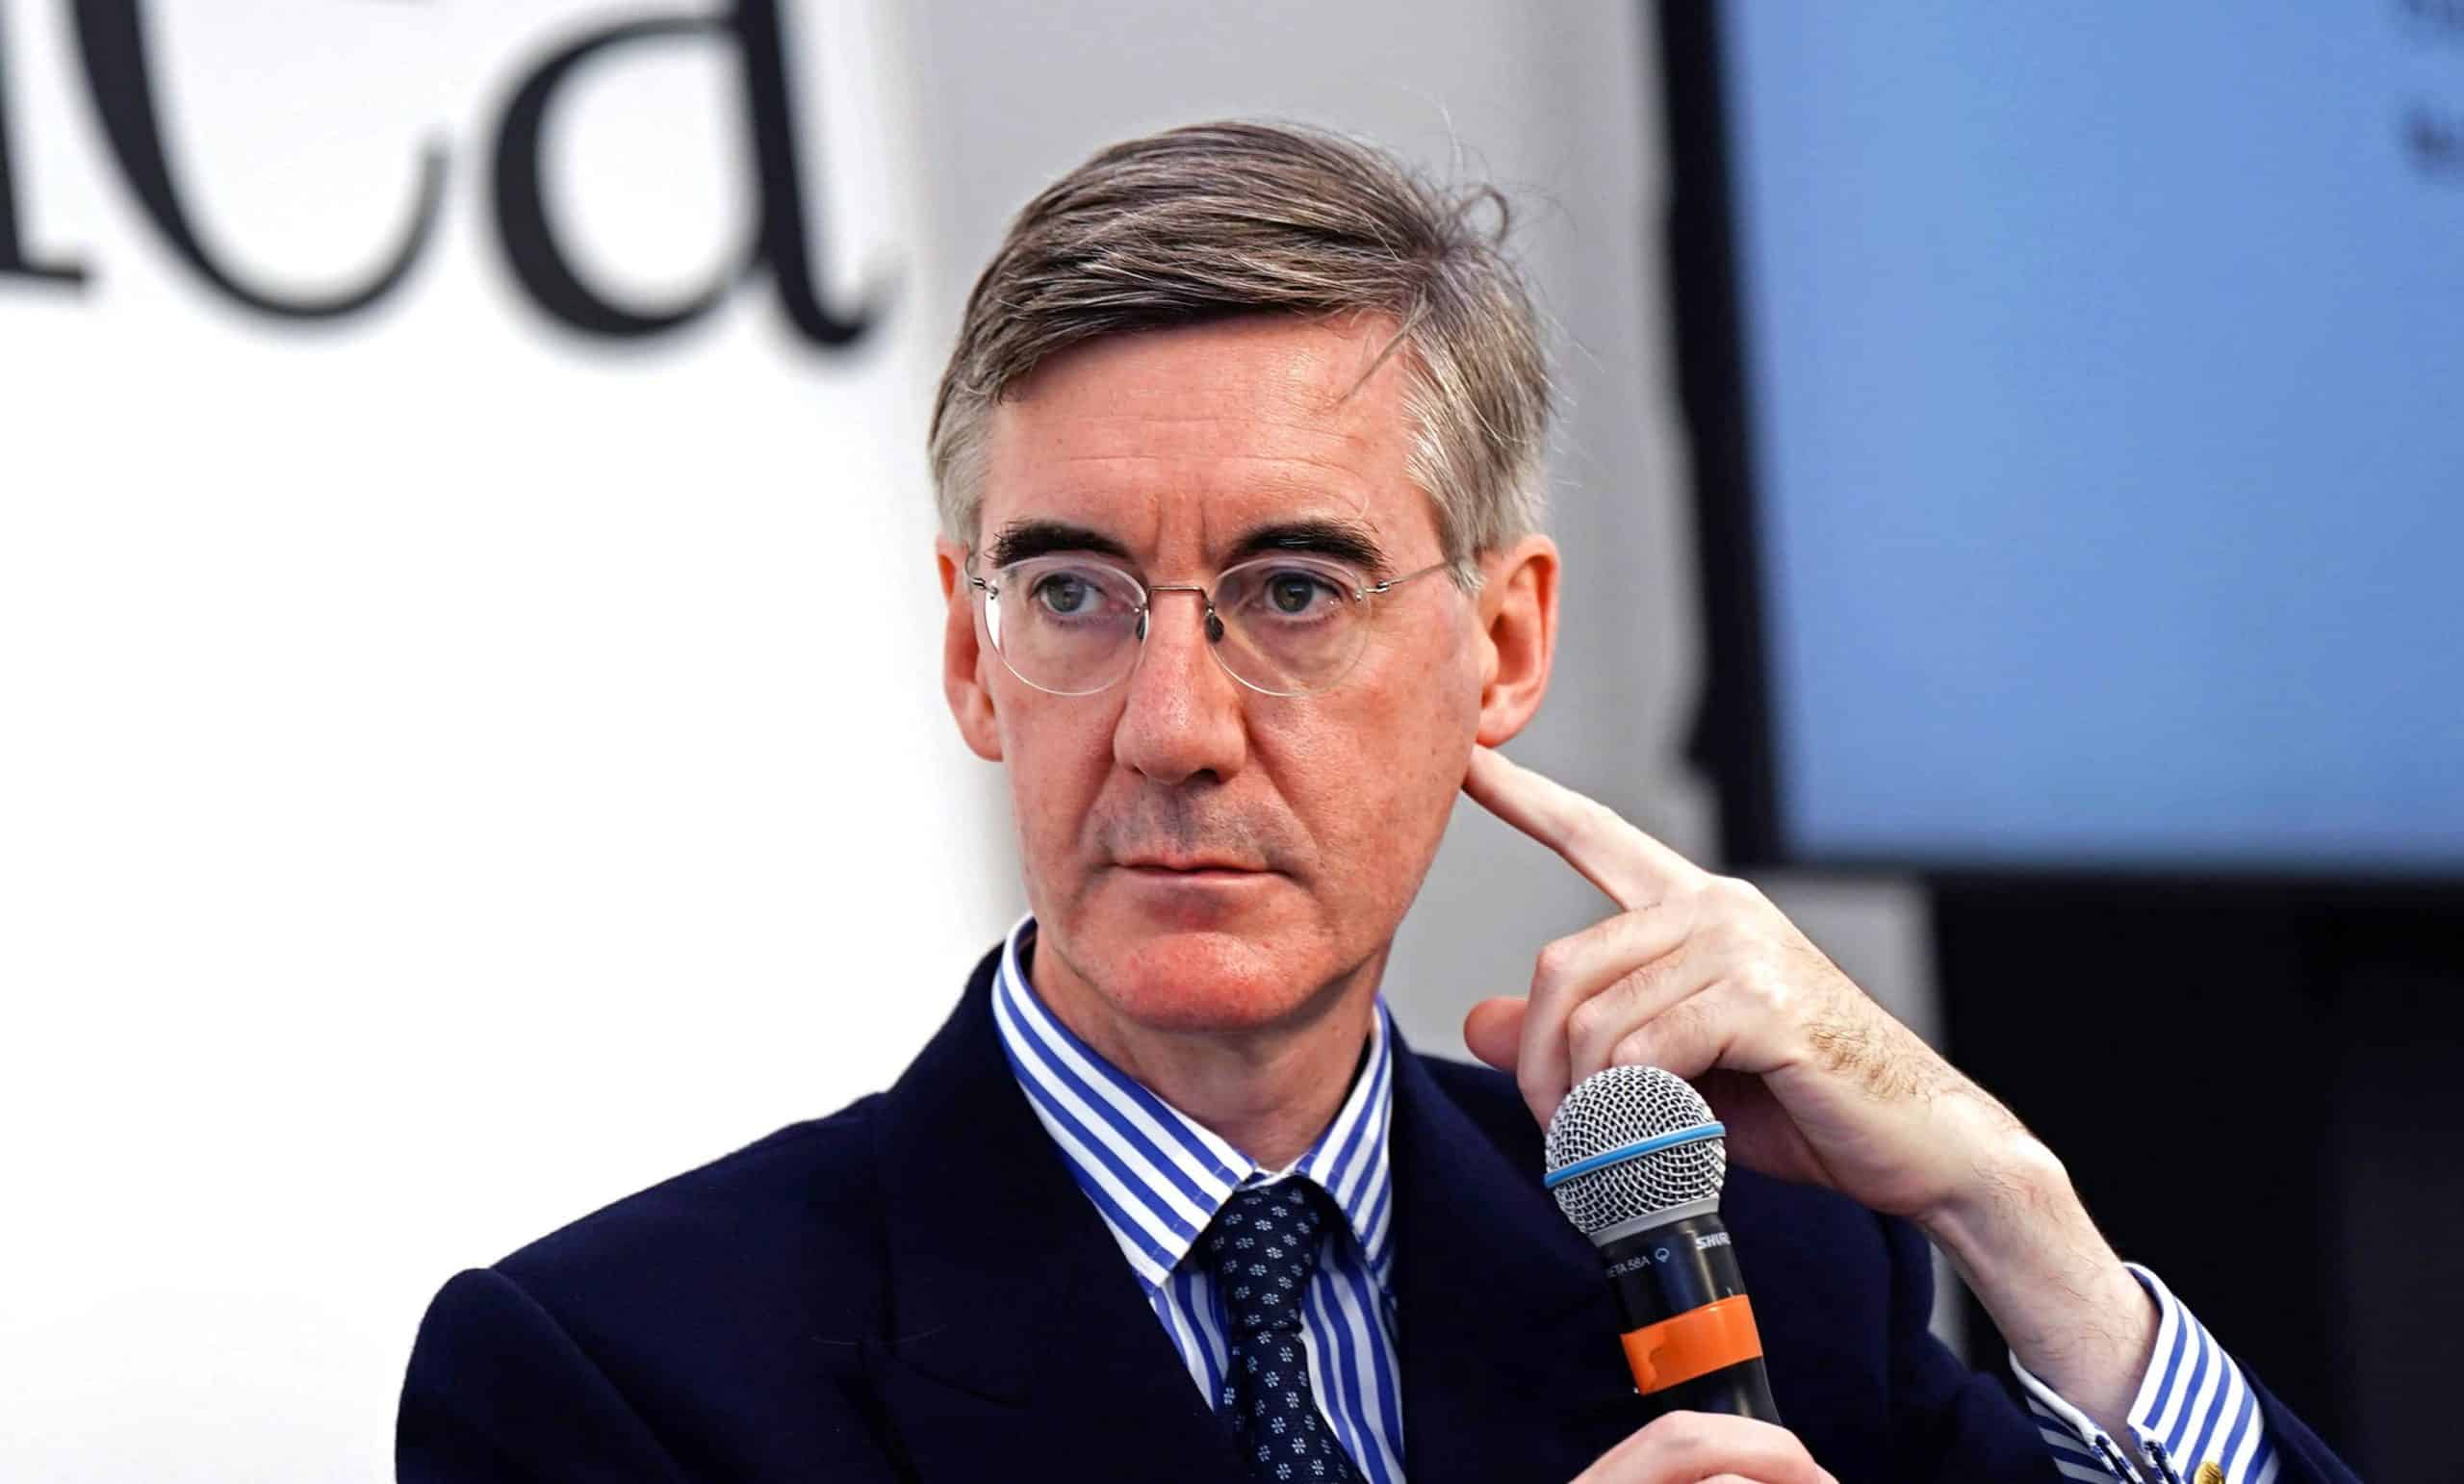 Rees-Mogg urges Brits to go ‘where they are welcome’